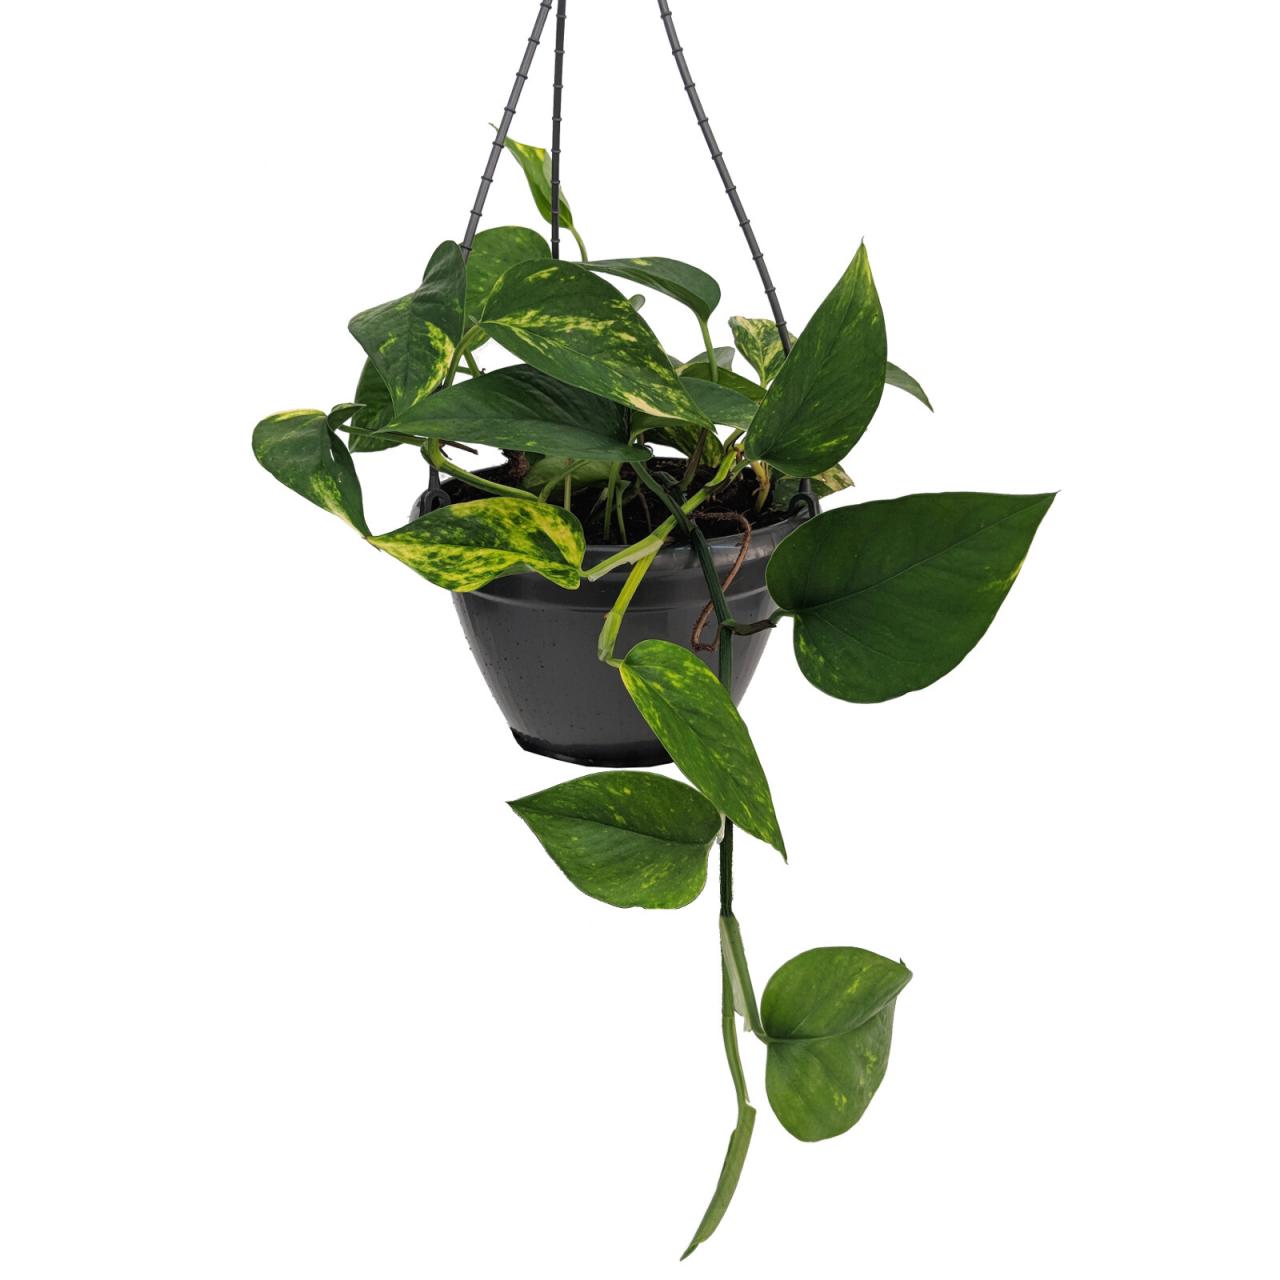 Hanging Plants Indoor | Devil's Ivy Bunnings Hanging: An Enchanting Addition to Your Home Decor